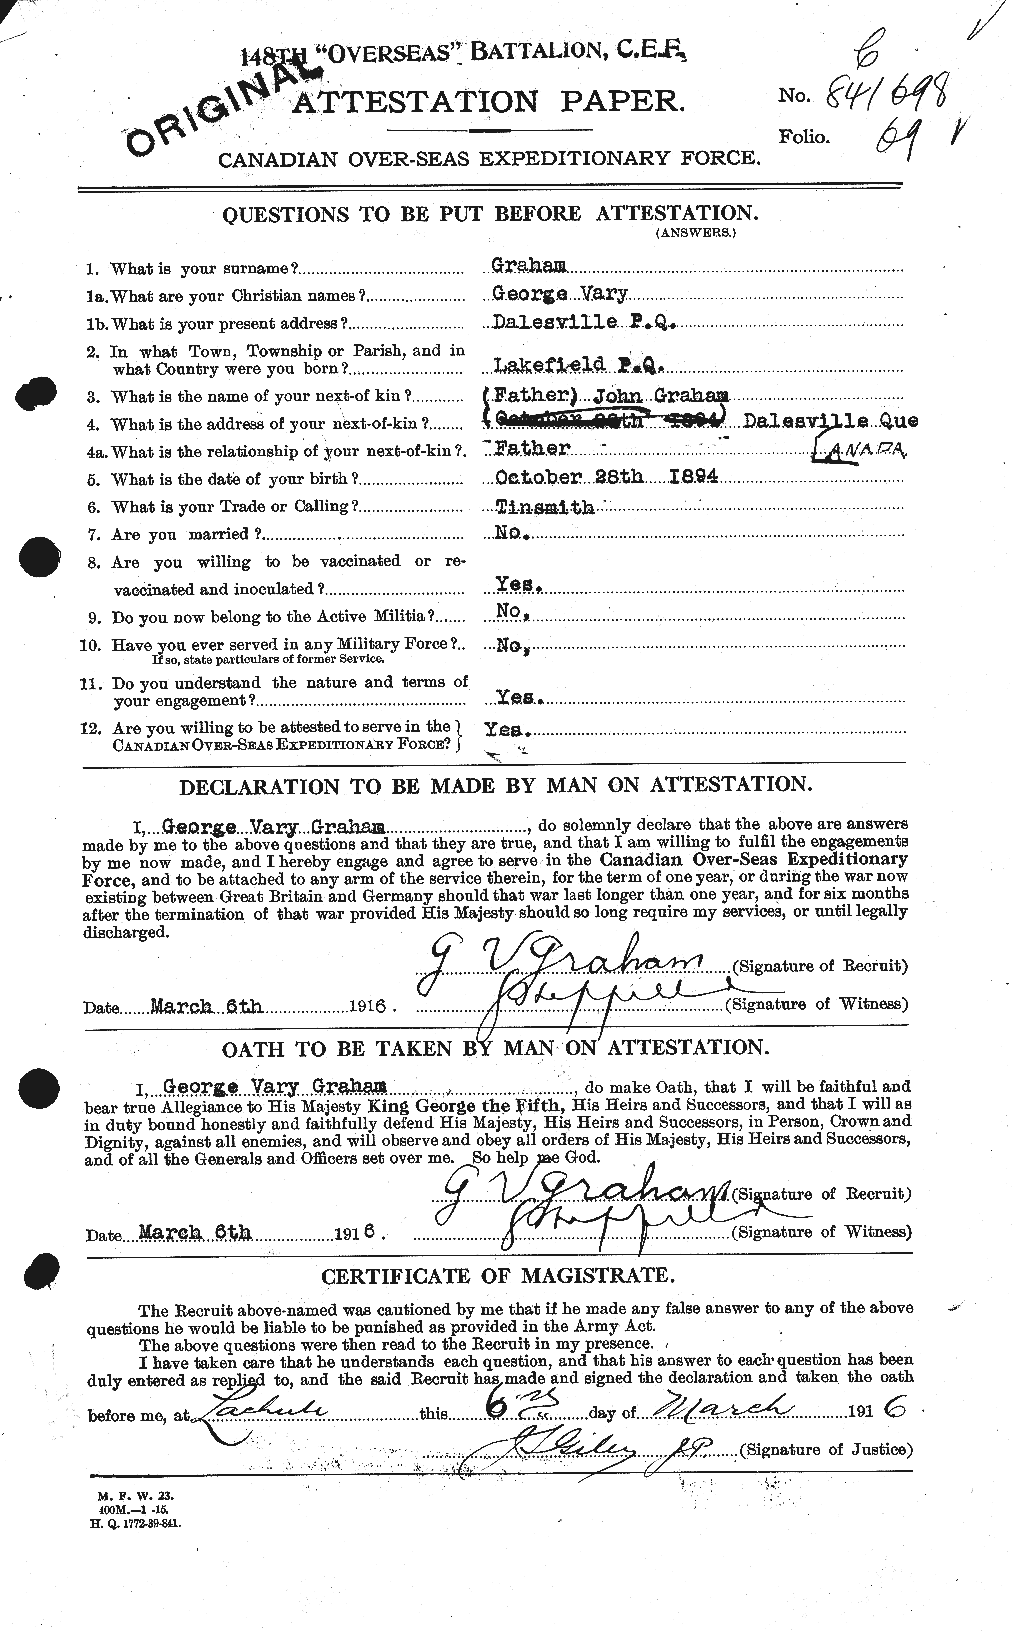 Personnel Records of the First World War - CEF 357674a